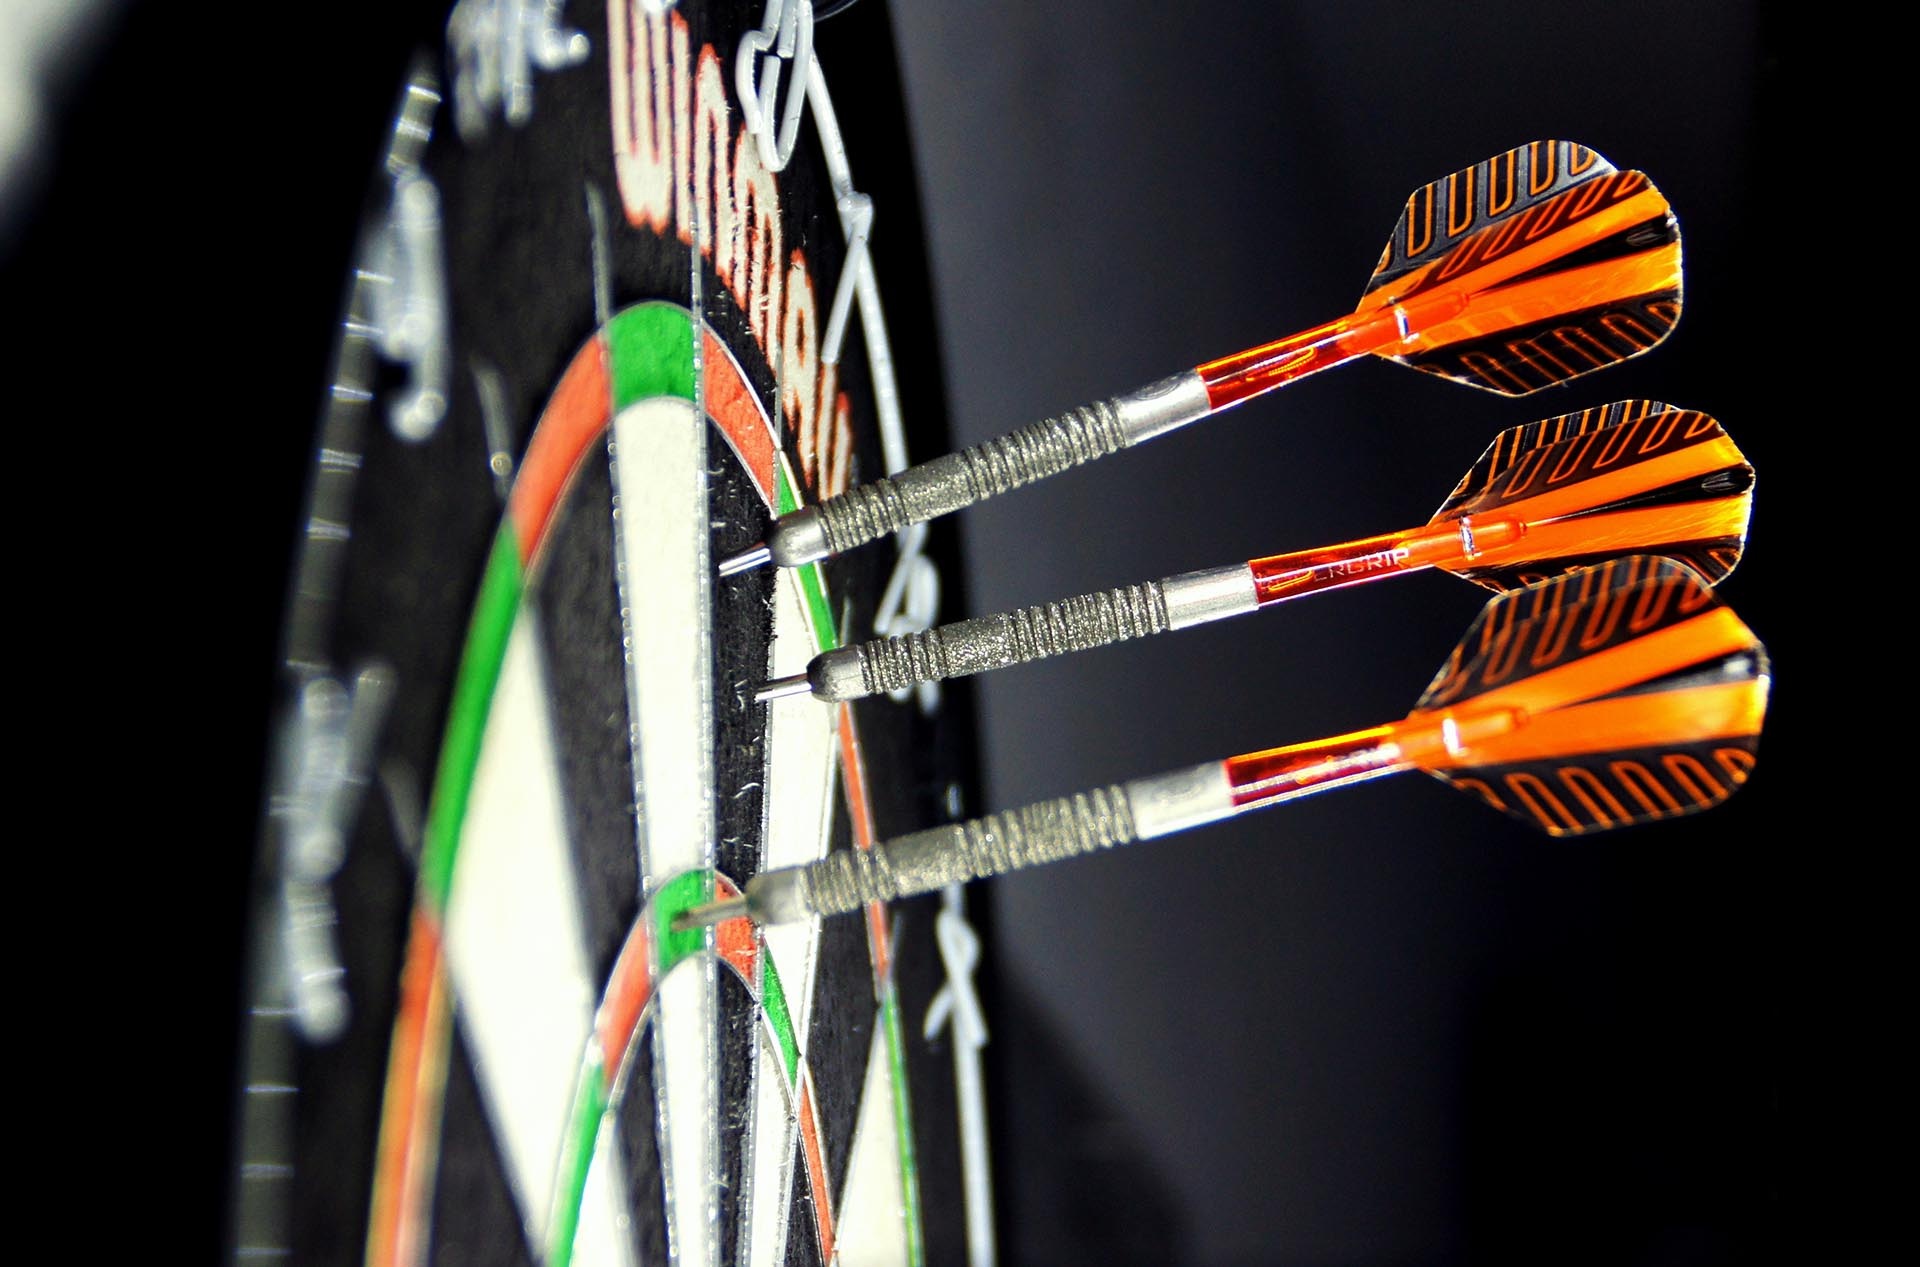 Darts: The board, Scoring system, Throwing a small dart onto different parts. 1920x1270 HD Wallpaper.